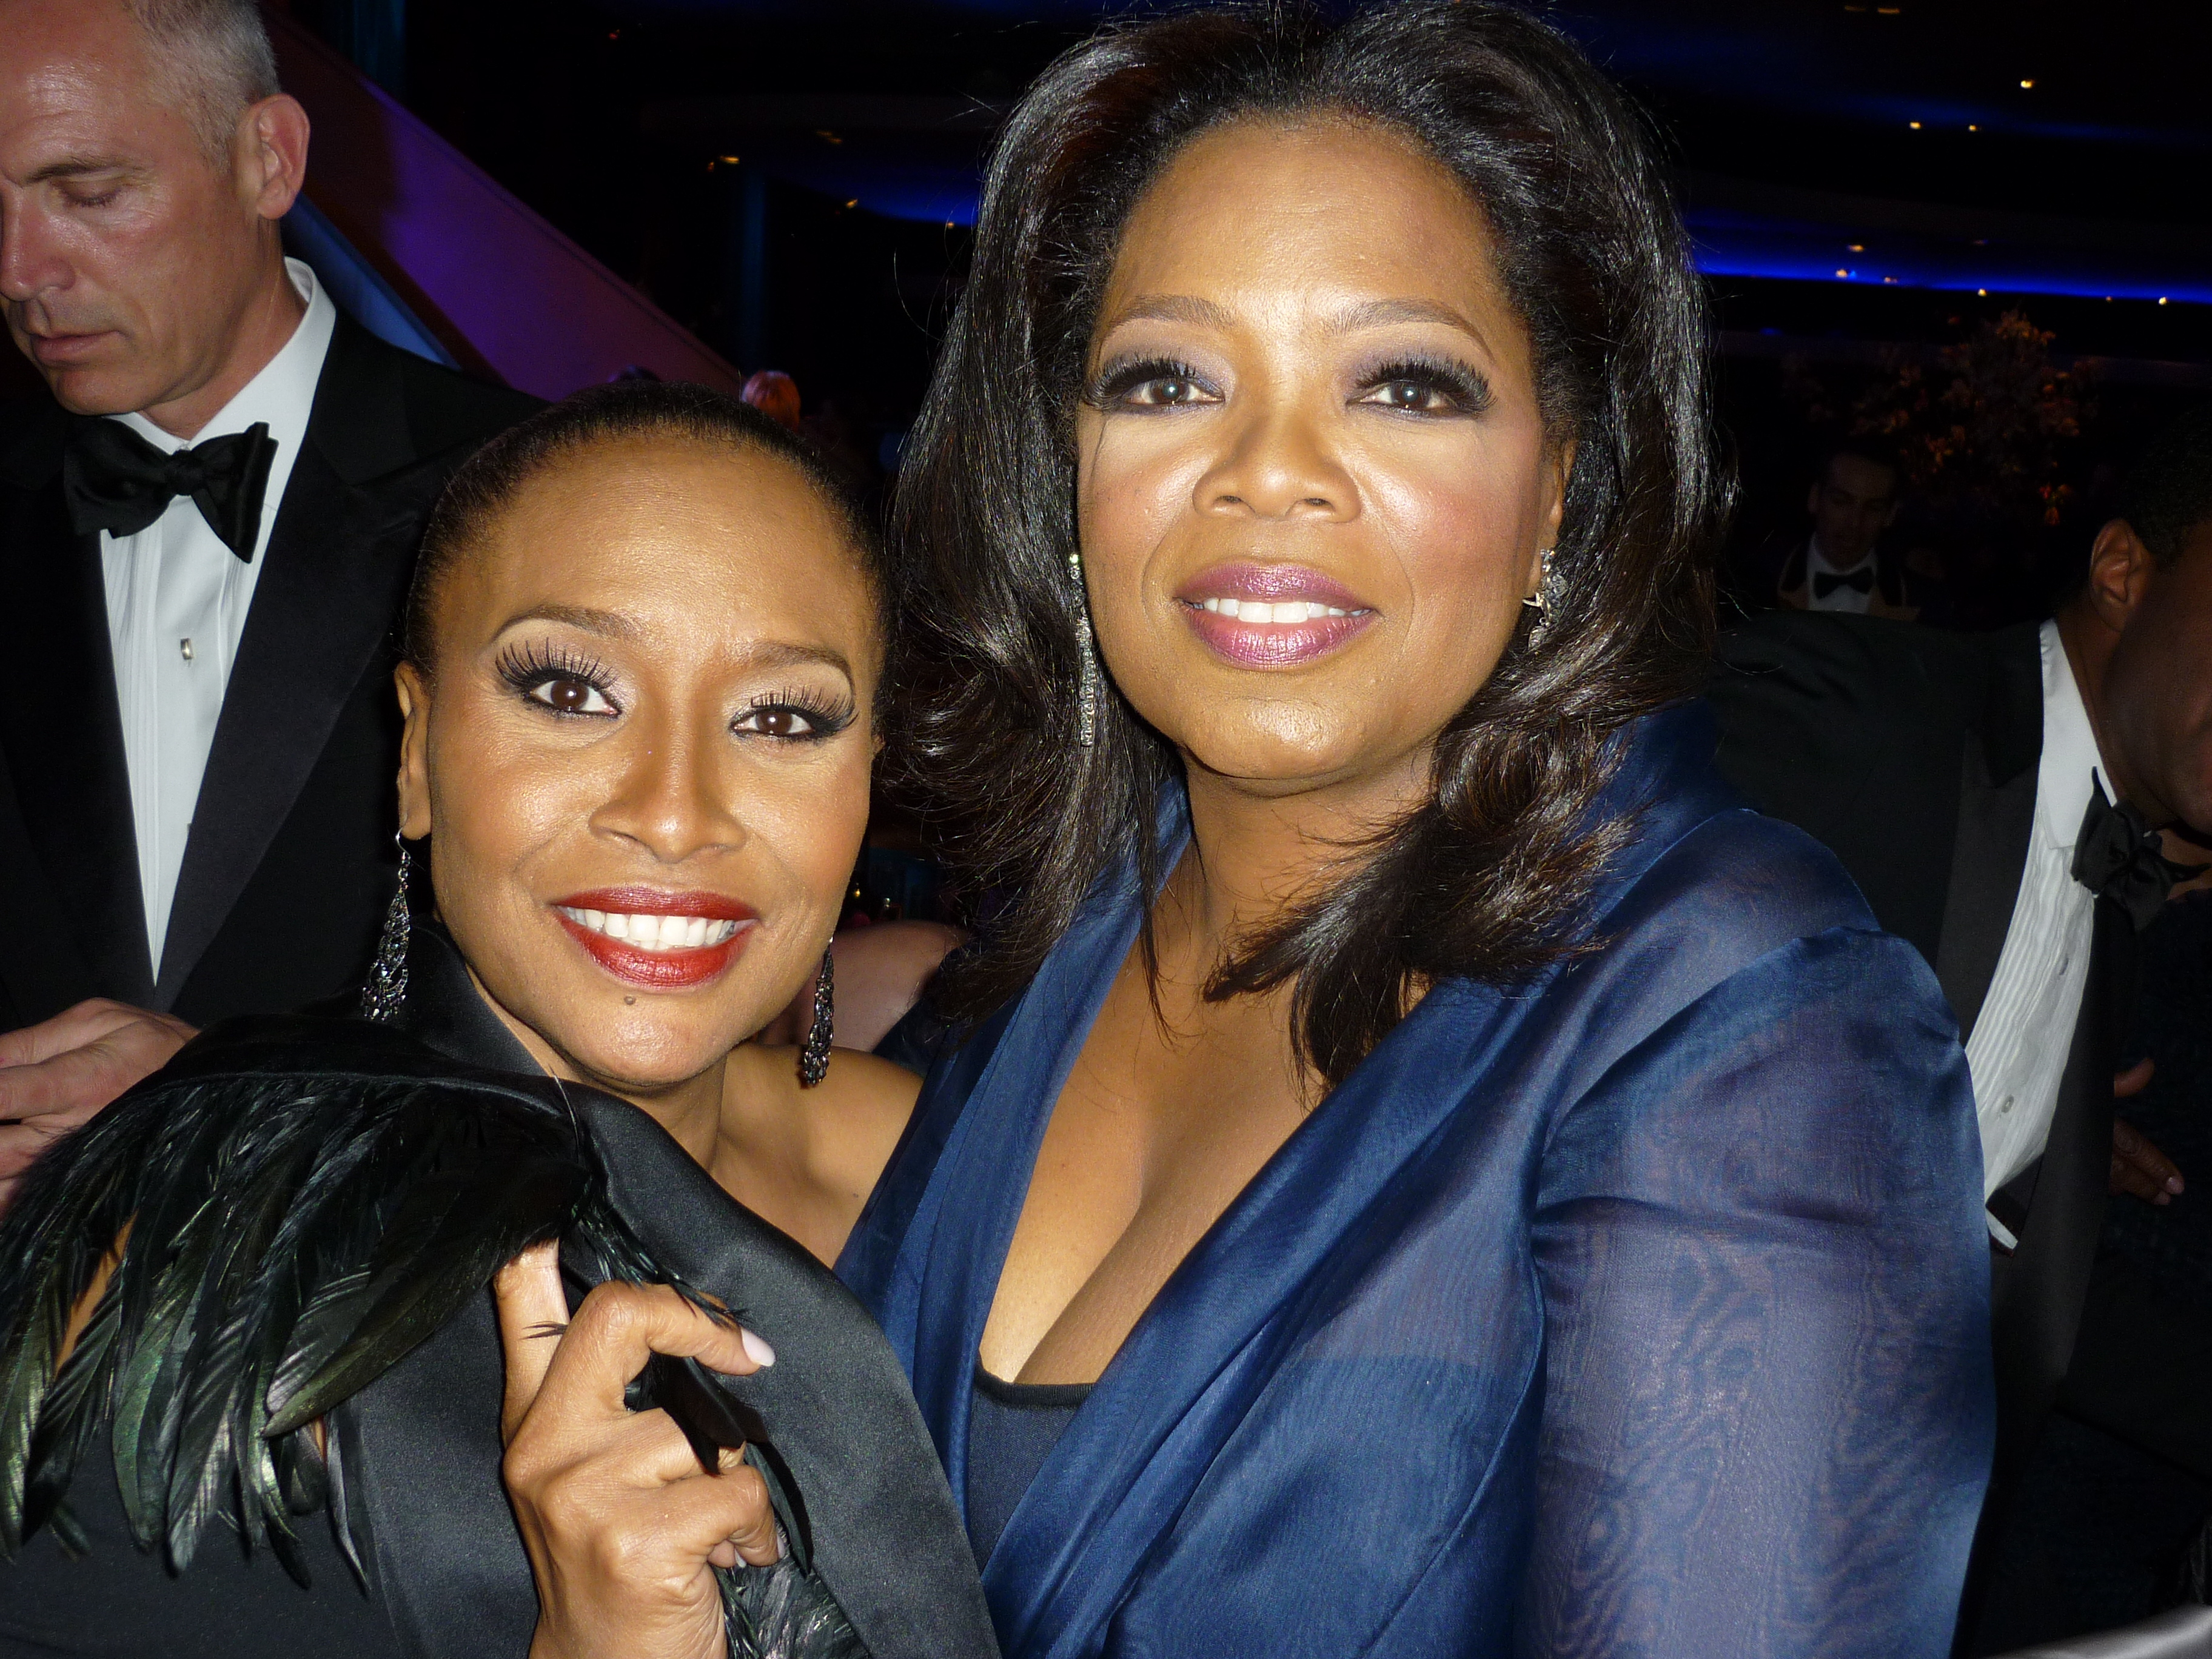 Jenifer Lewis and Oprah Winfrey at the 2010 Academy Awards ceremony in Los Angeles.